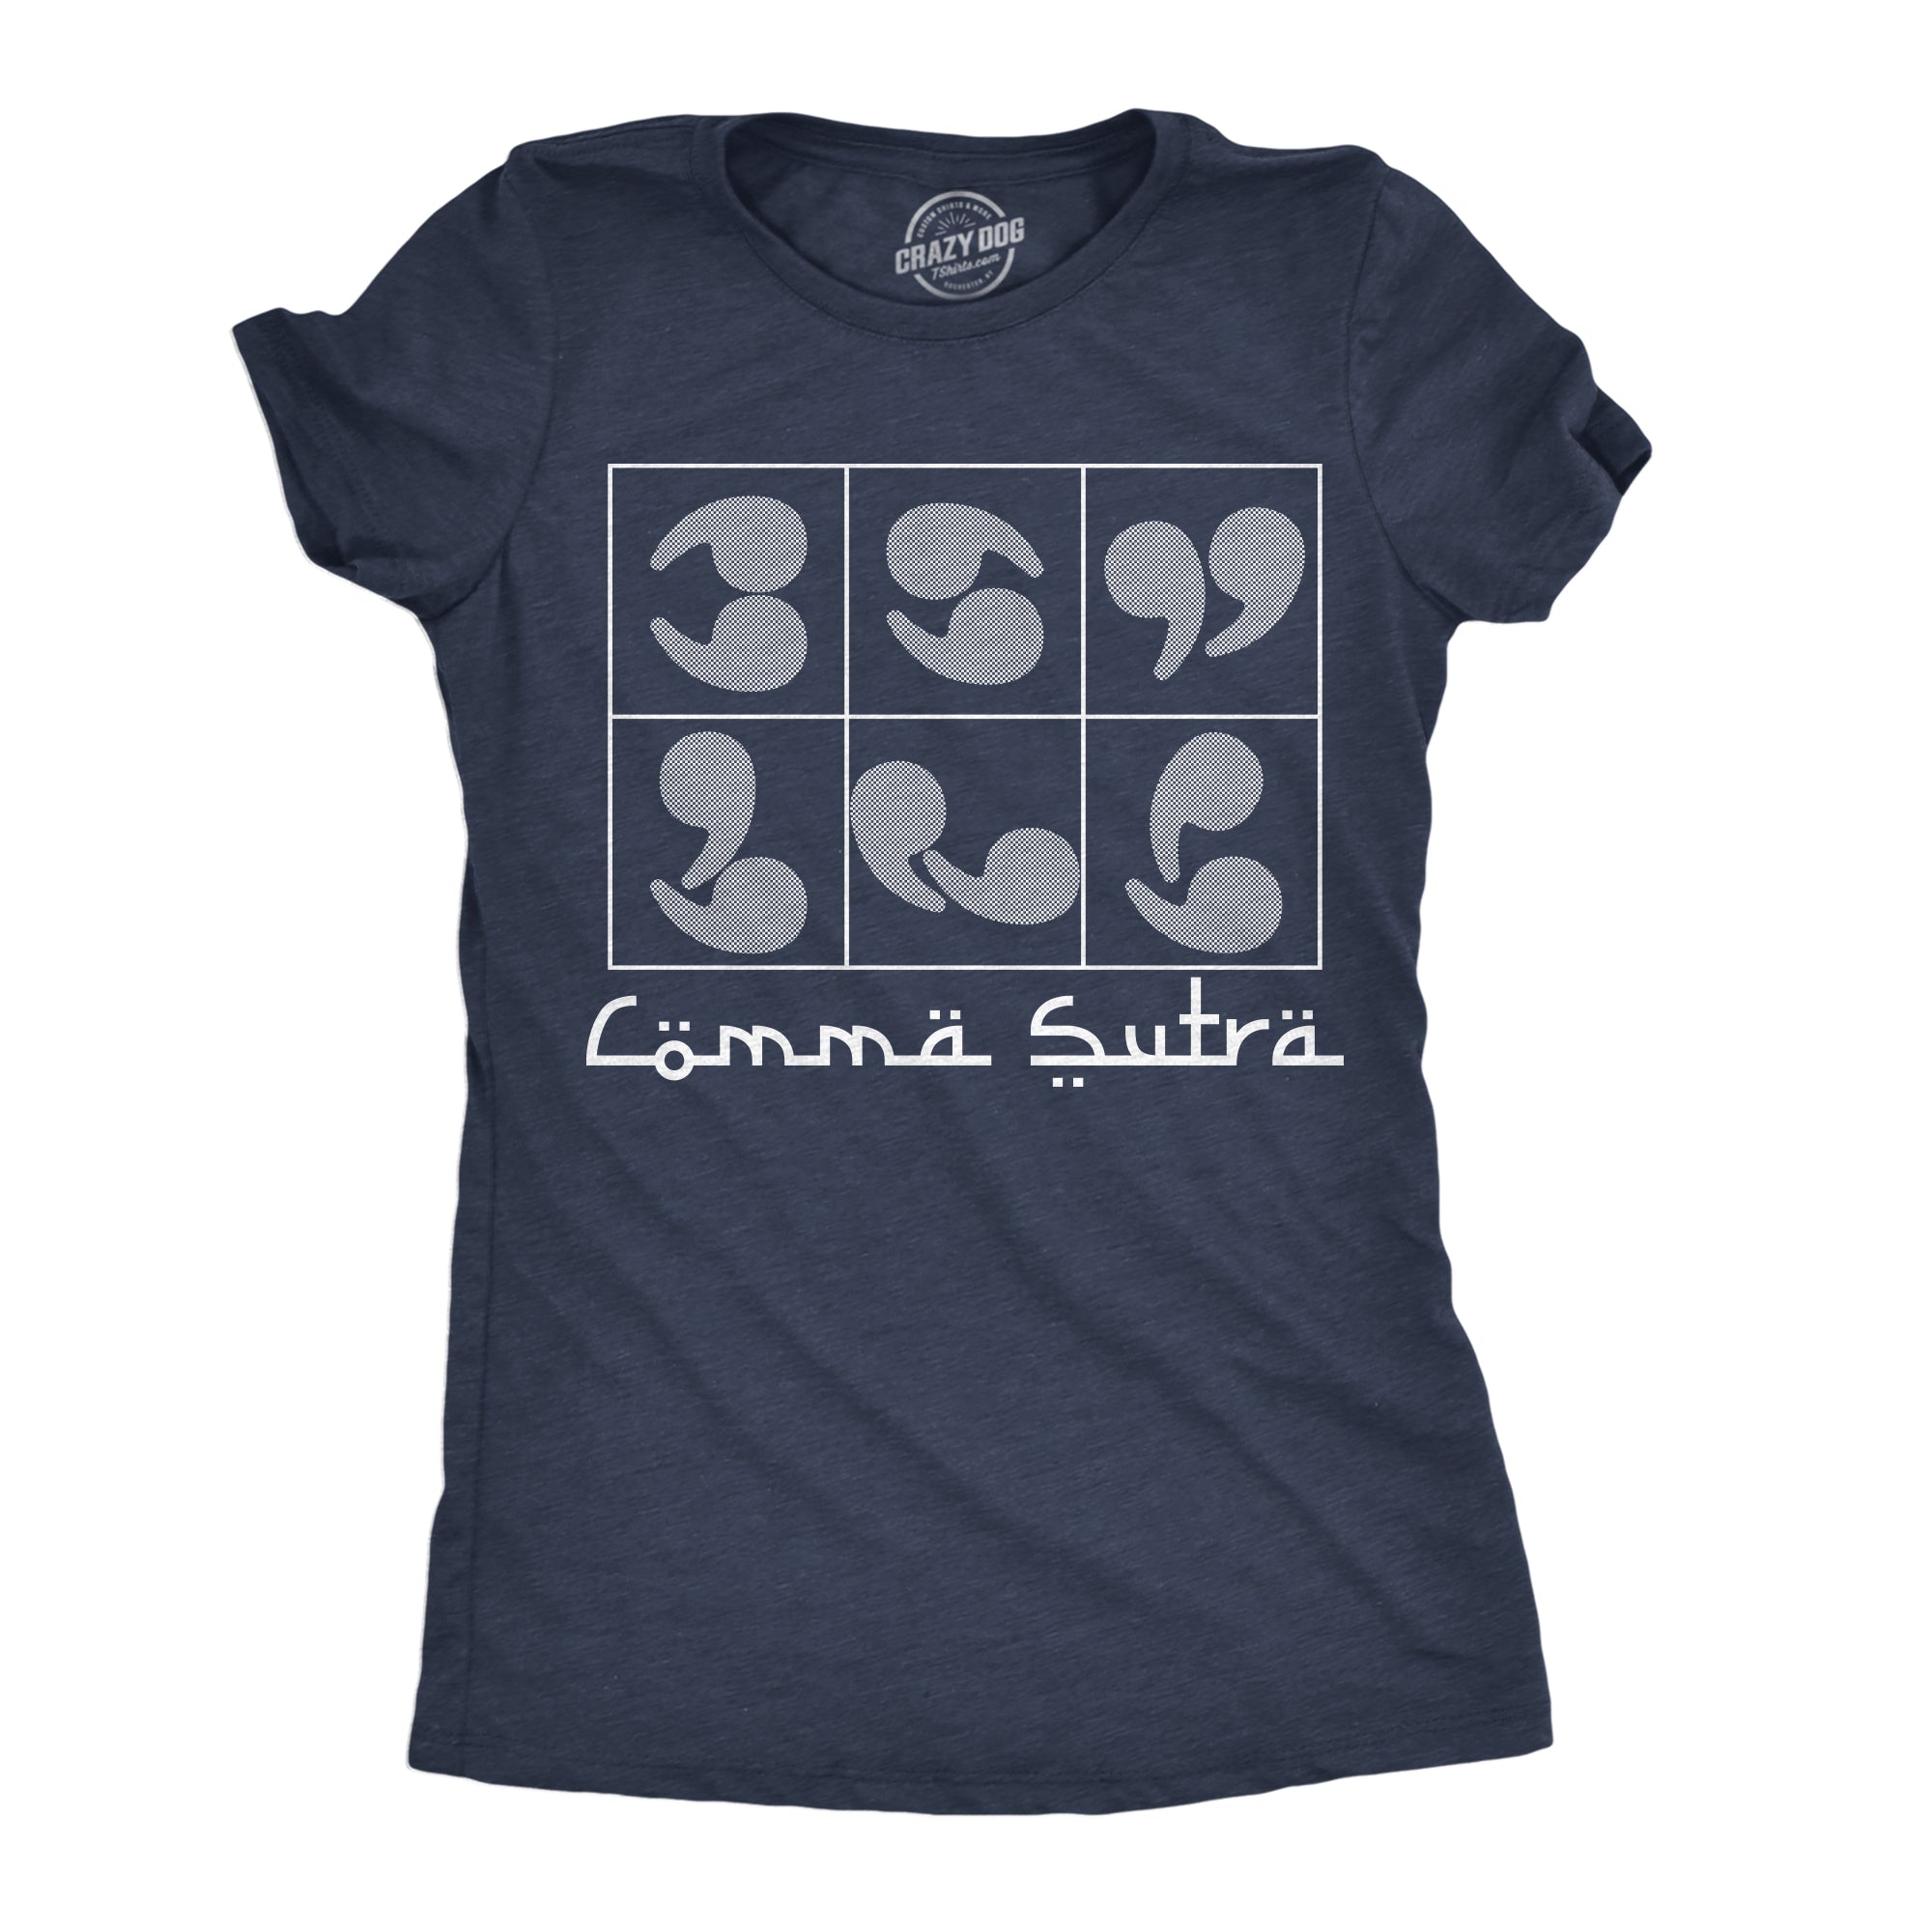 Funny Heather Navy - Comma Sutra Comma Sutra Womens T Shirt Nerdy sarcastic Tee